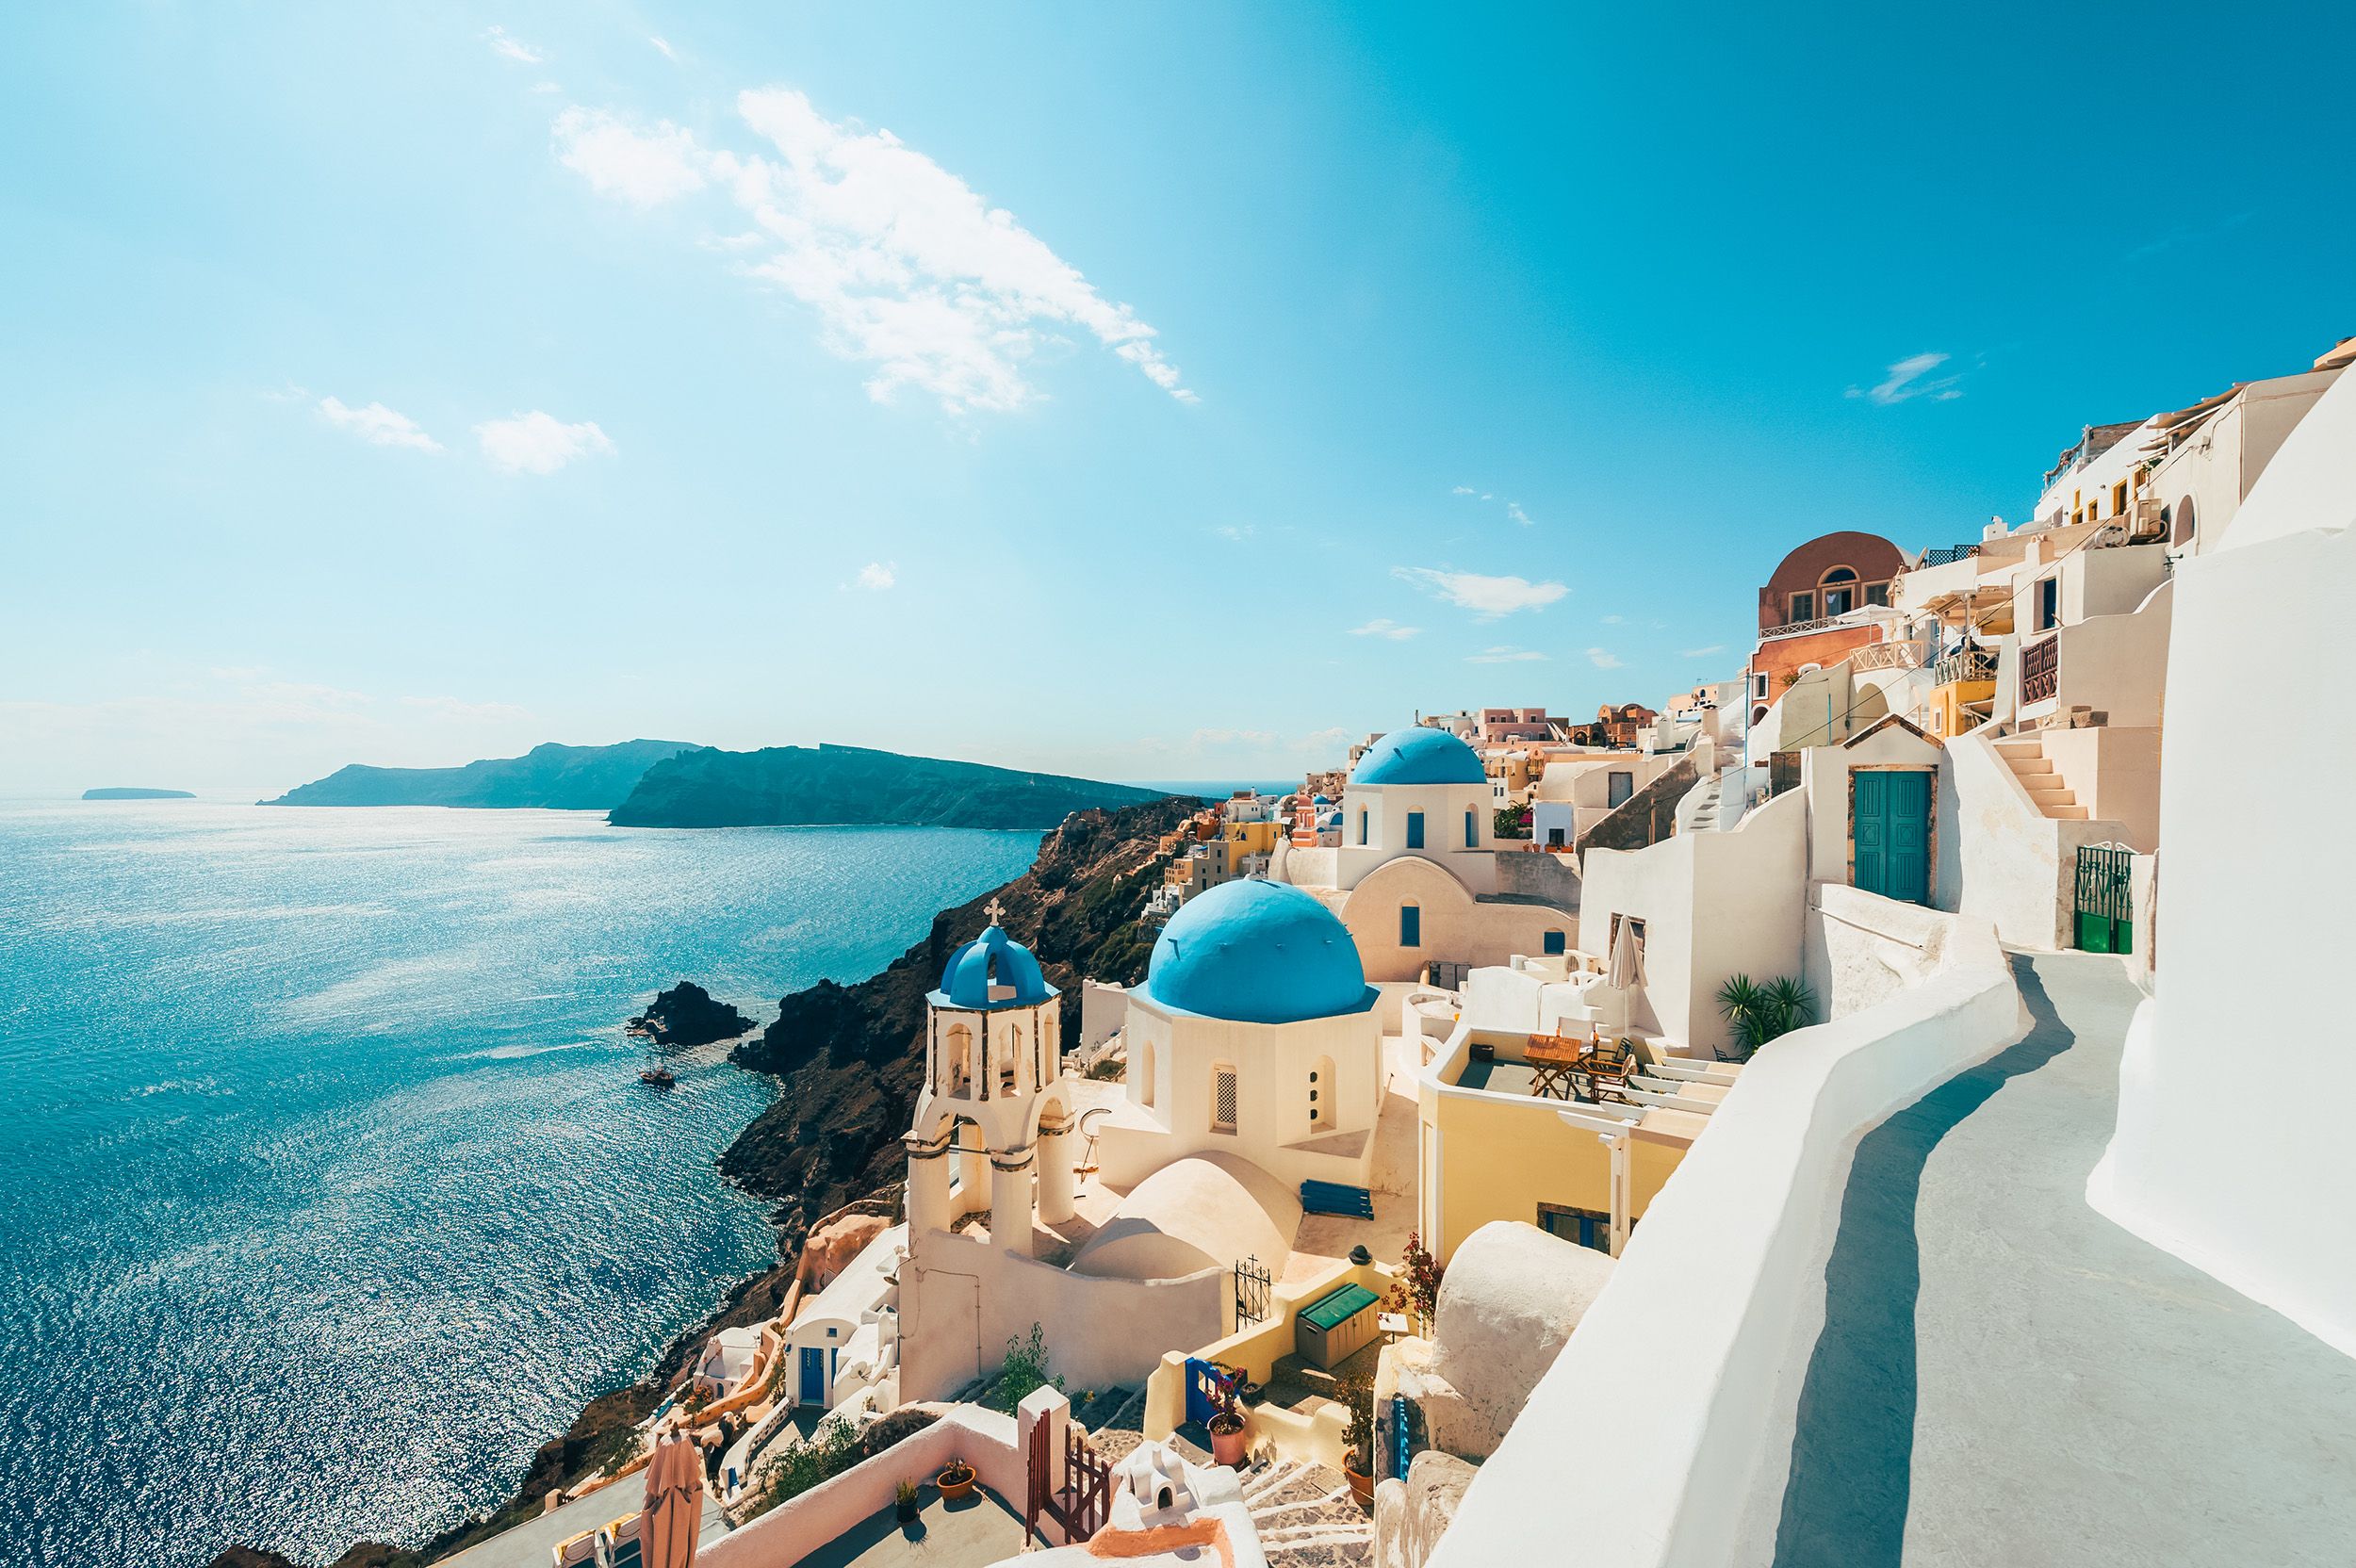 Best hotels in Greece and the Greek islands for 2022